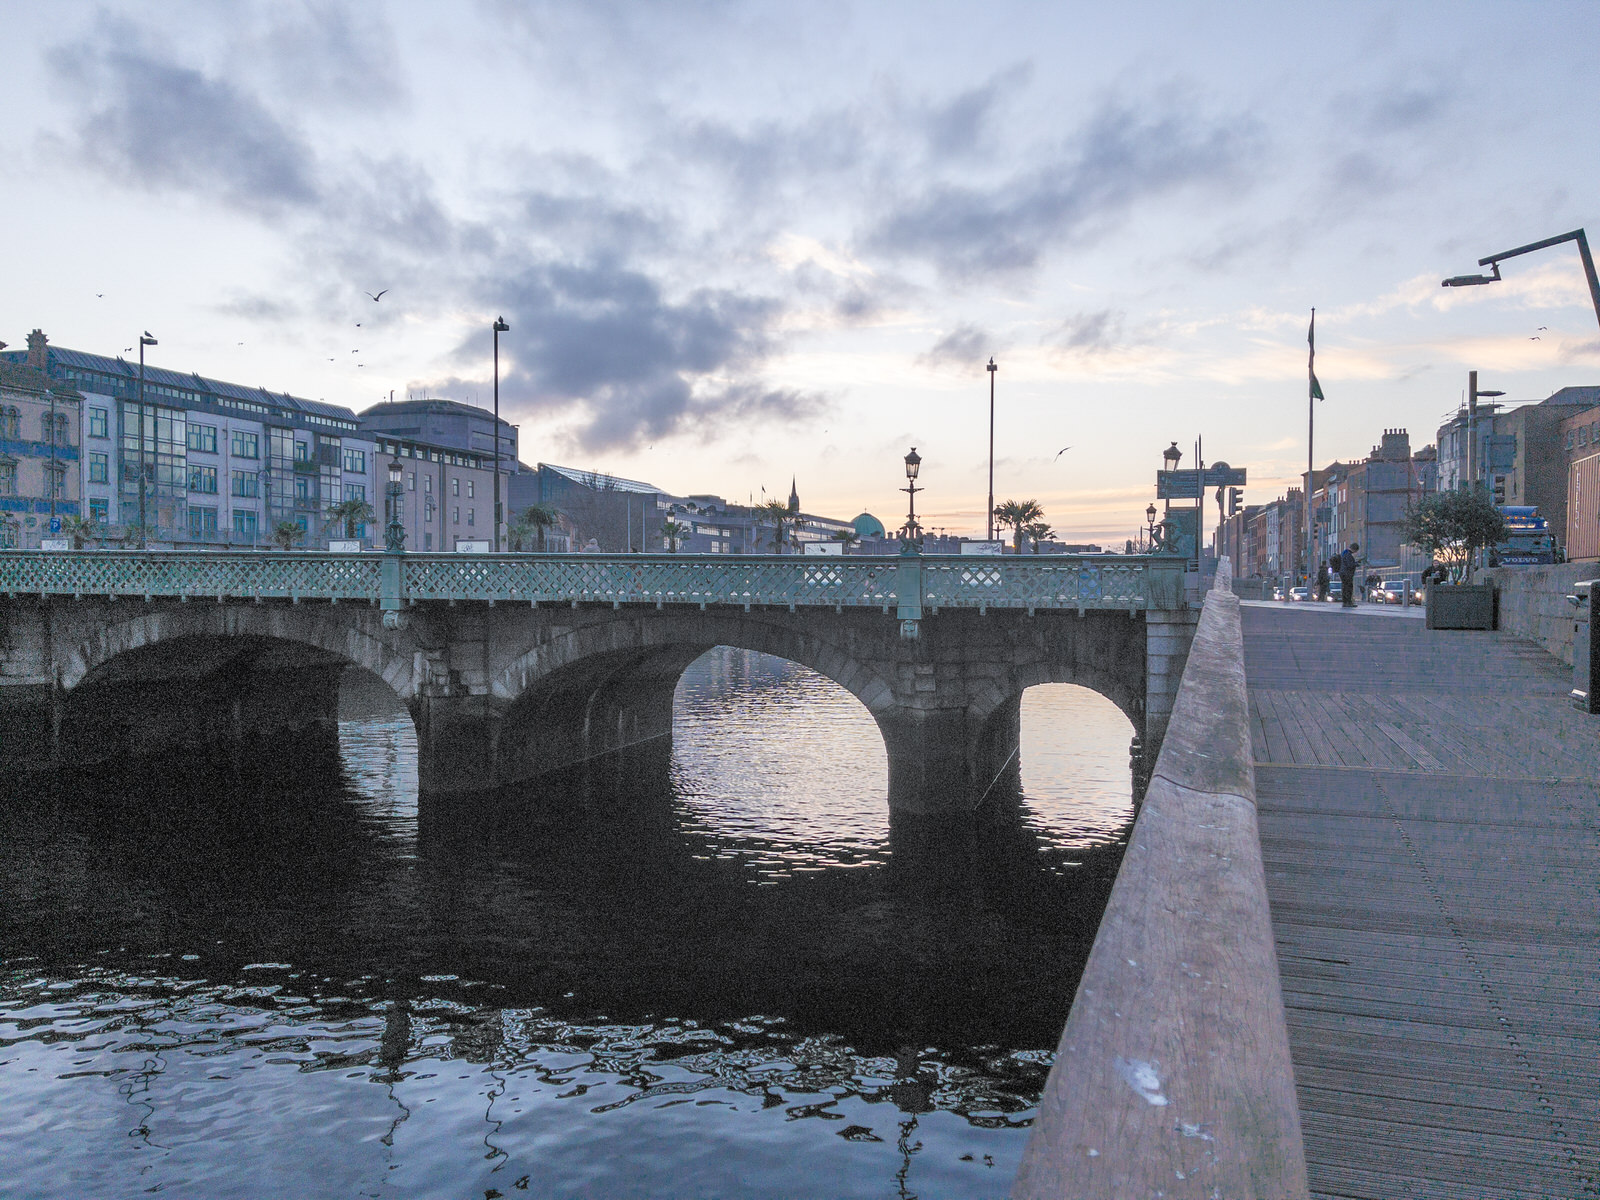 THE QUAYS JUST BEFORE SUNSET